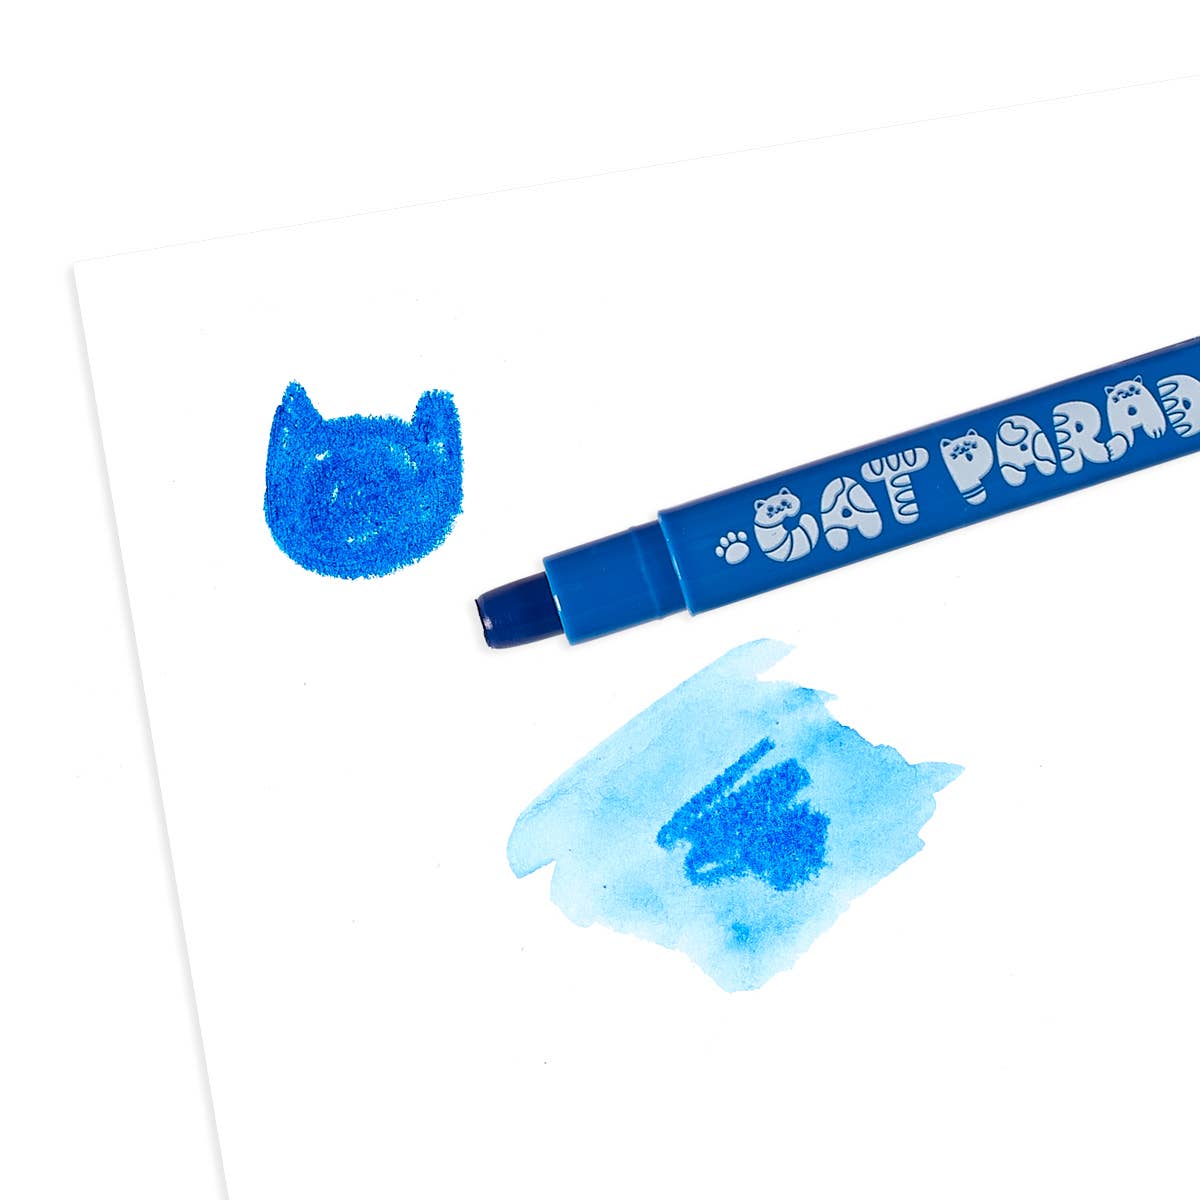 OOLY - Cat Parade Gel Crayons - Set of 12  OOLY   -better made easy-eco-friendly-sustainable-gifting